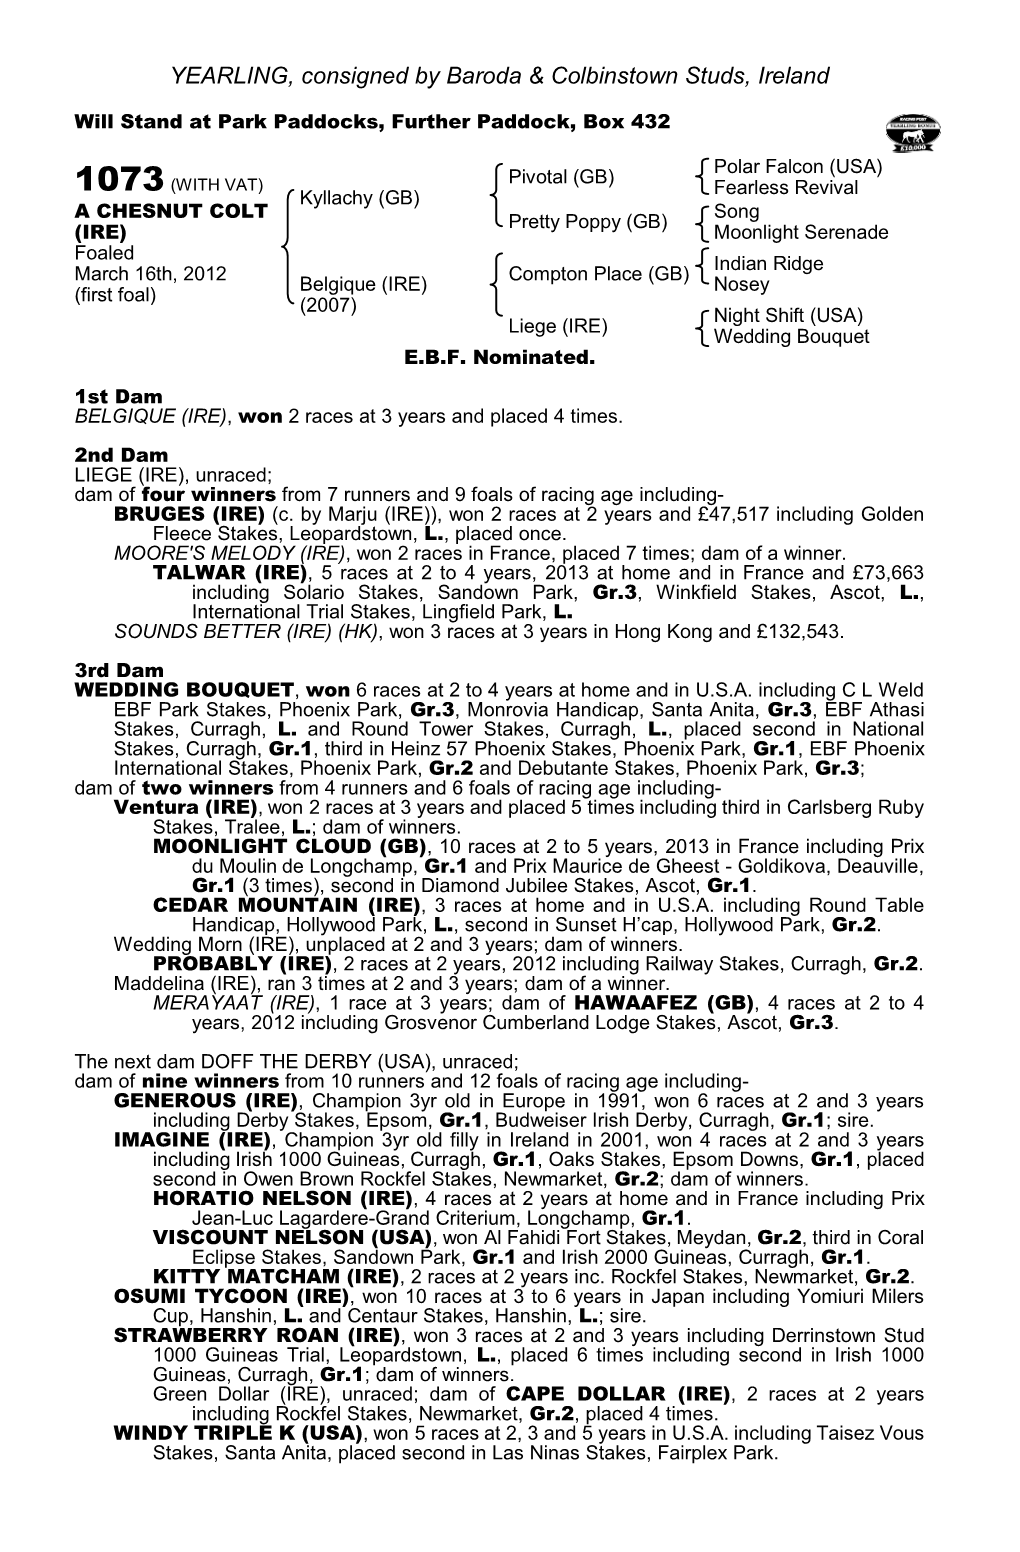 YEARLING, Consigned by Baroda & Colbinstown Studs, Ireland